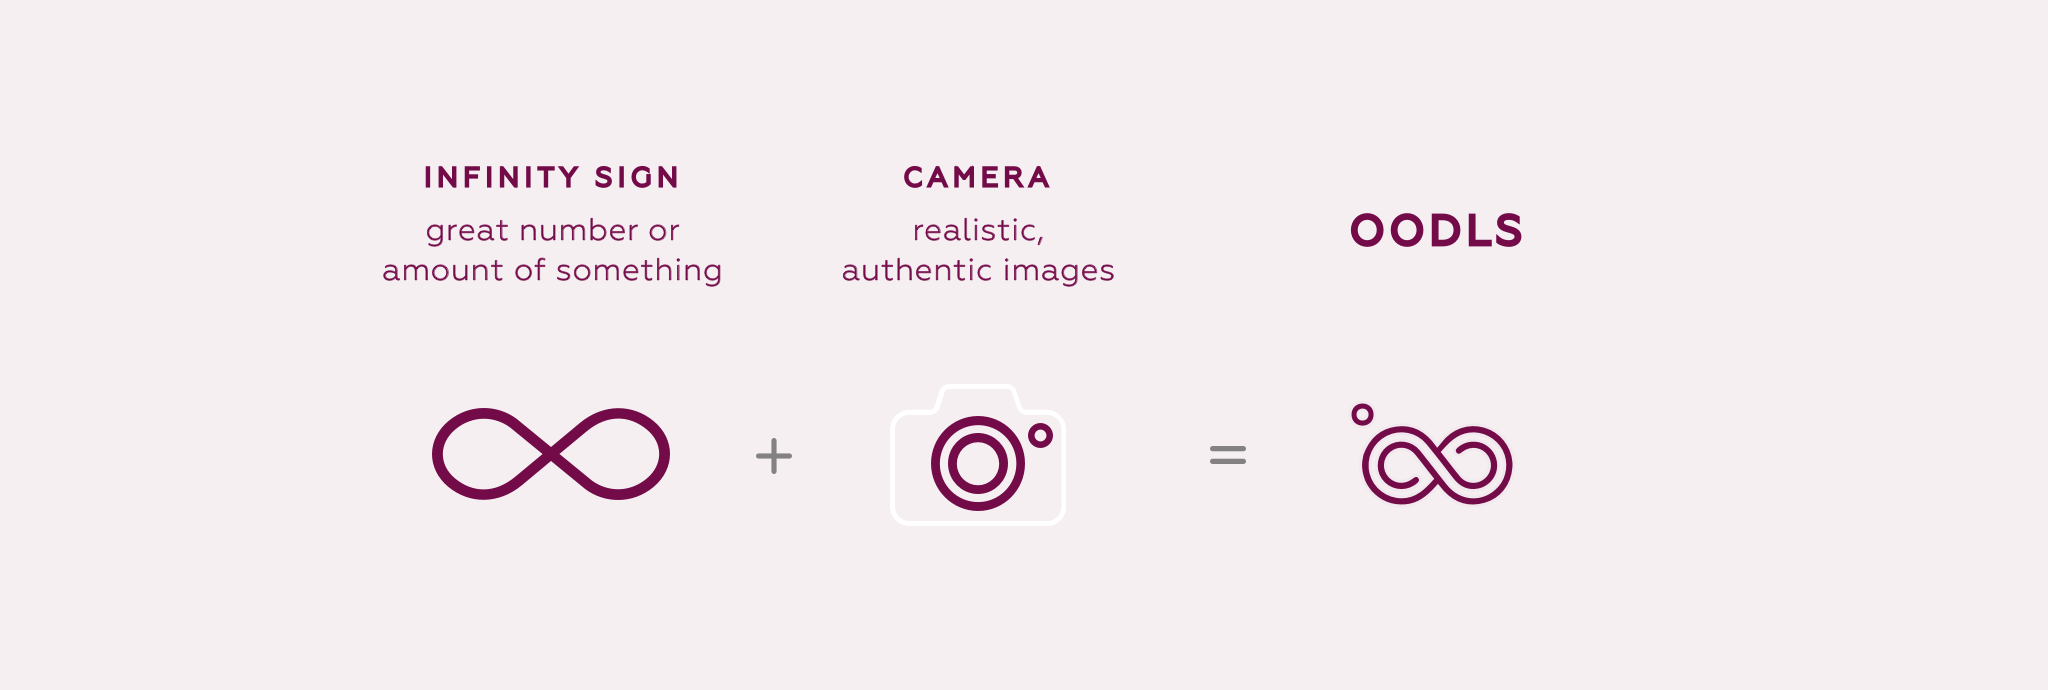 A breakdown of the new logo proposal showing the combination of the infinity symbol with a simple pictograph of a camera to 
    produce the Oodls brand name.